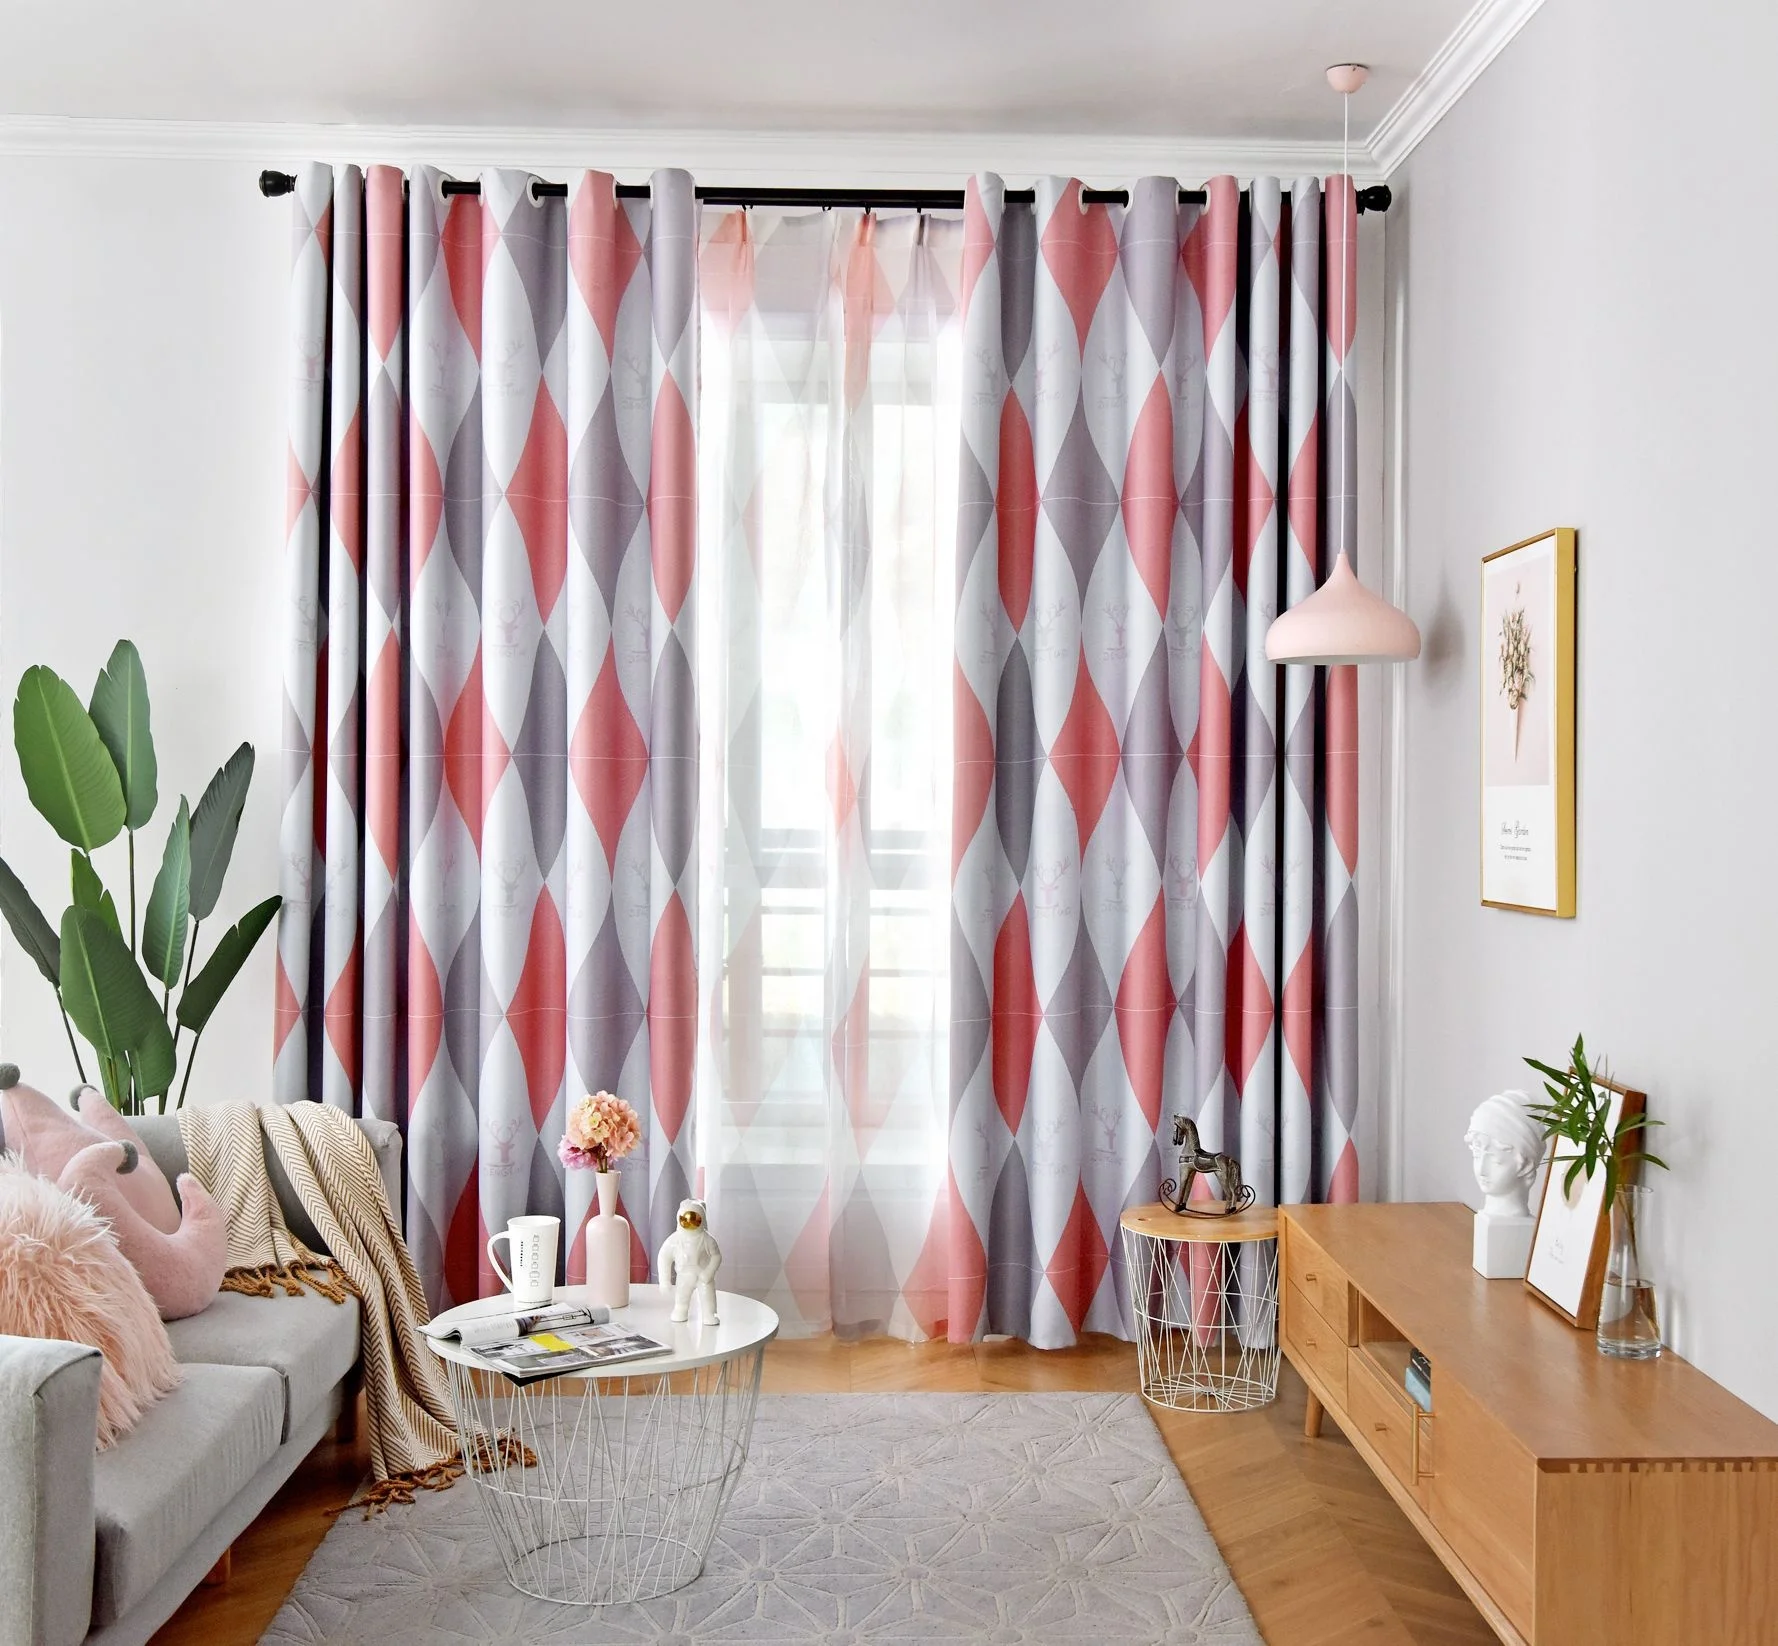 
Modern Nordic Simplicity Yellow Geometric Printed Curtain Living Room Bedroom Home Decoration Polyester Window Curtains 